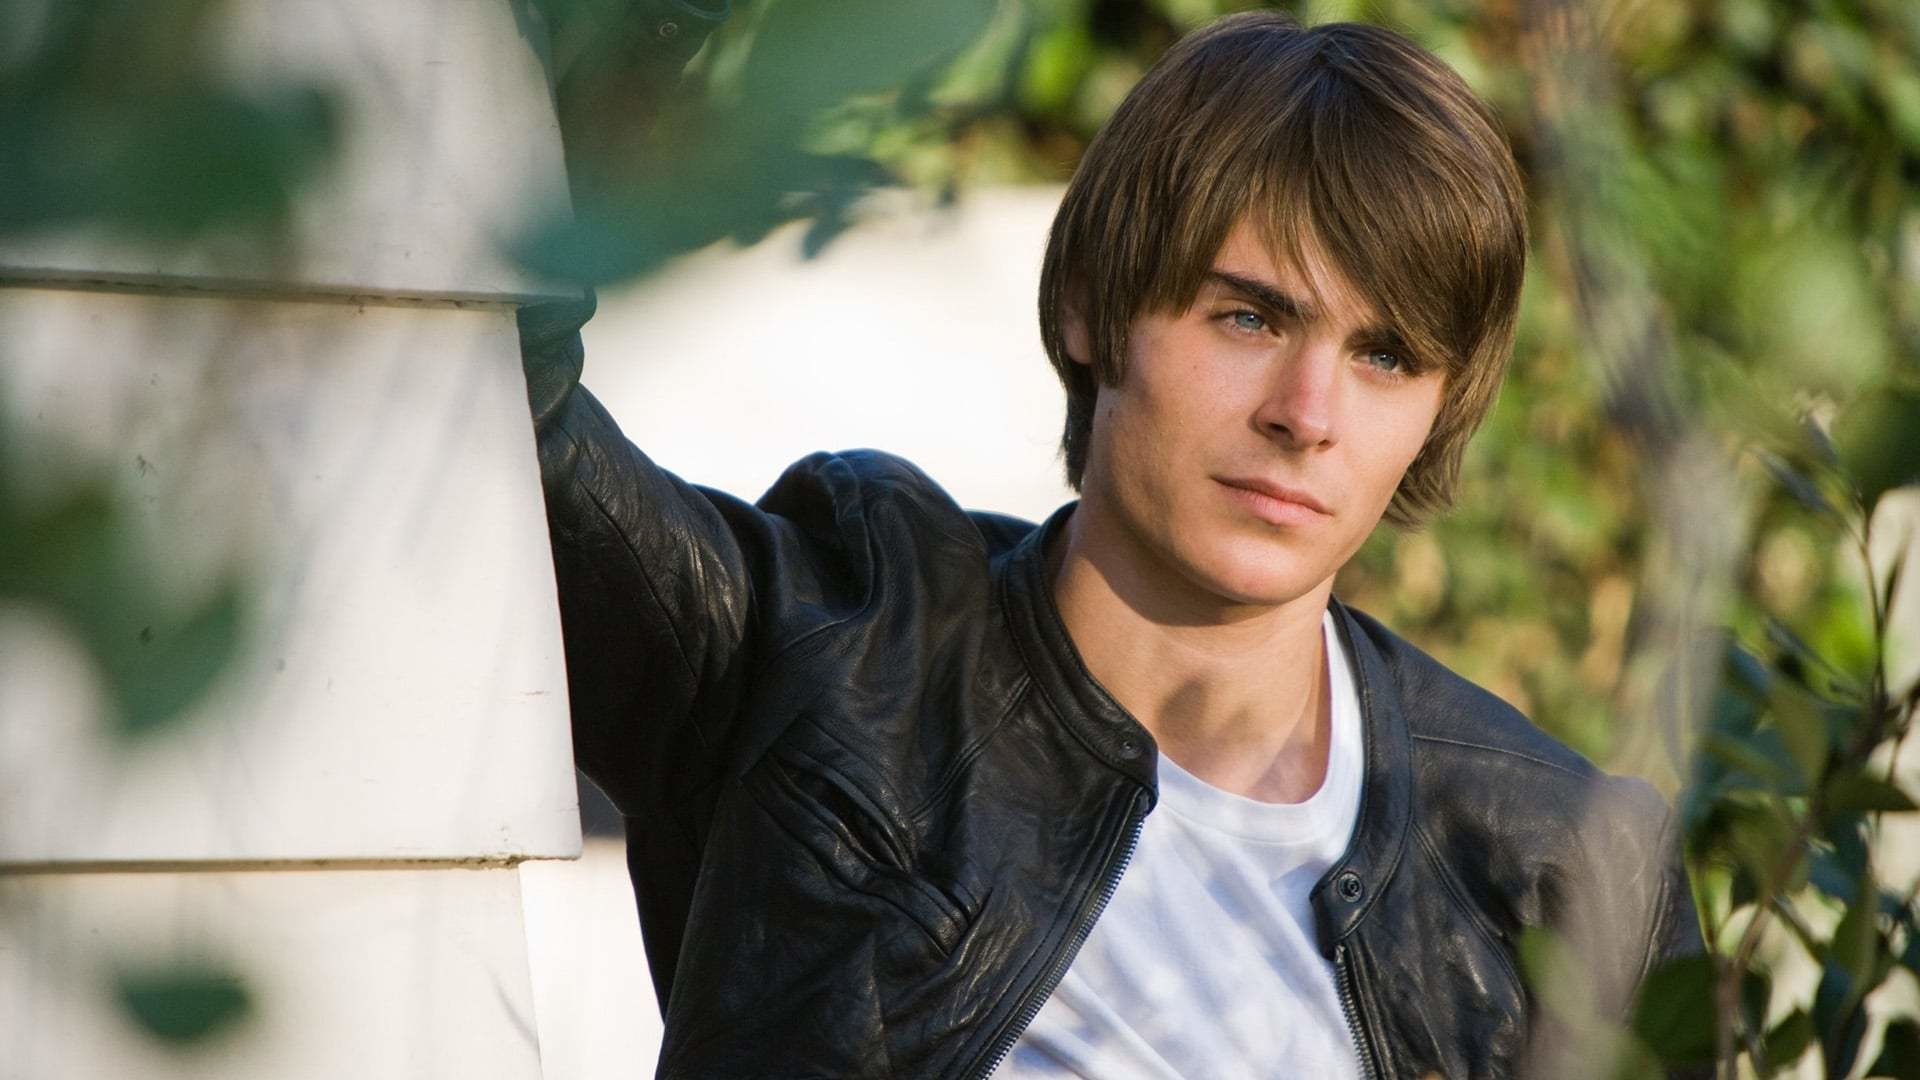 1920x1080 Amazing Zac Efron Wallpaper of awesome full screen HD wallpapers to  download for free. You